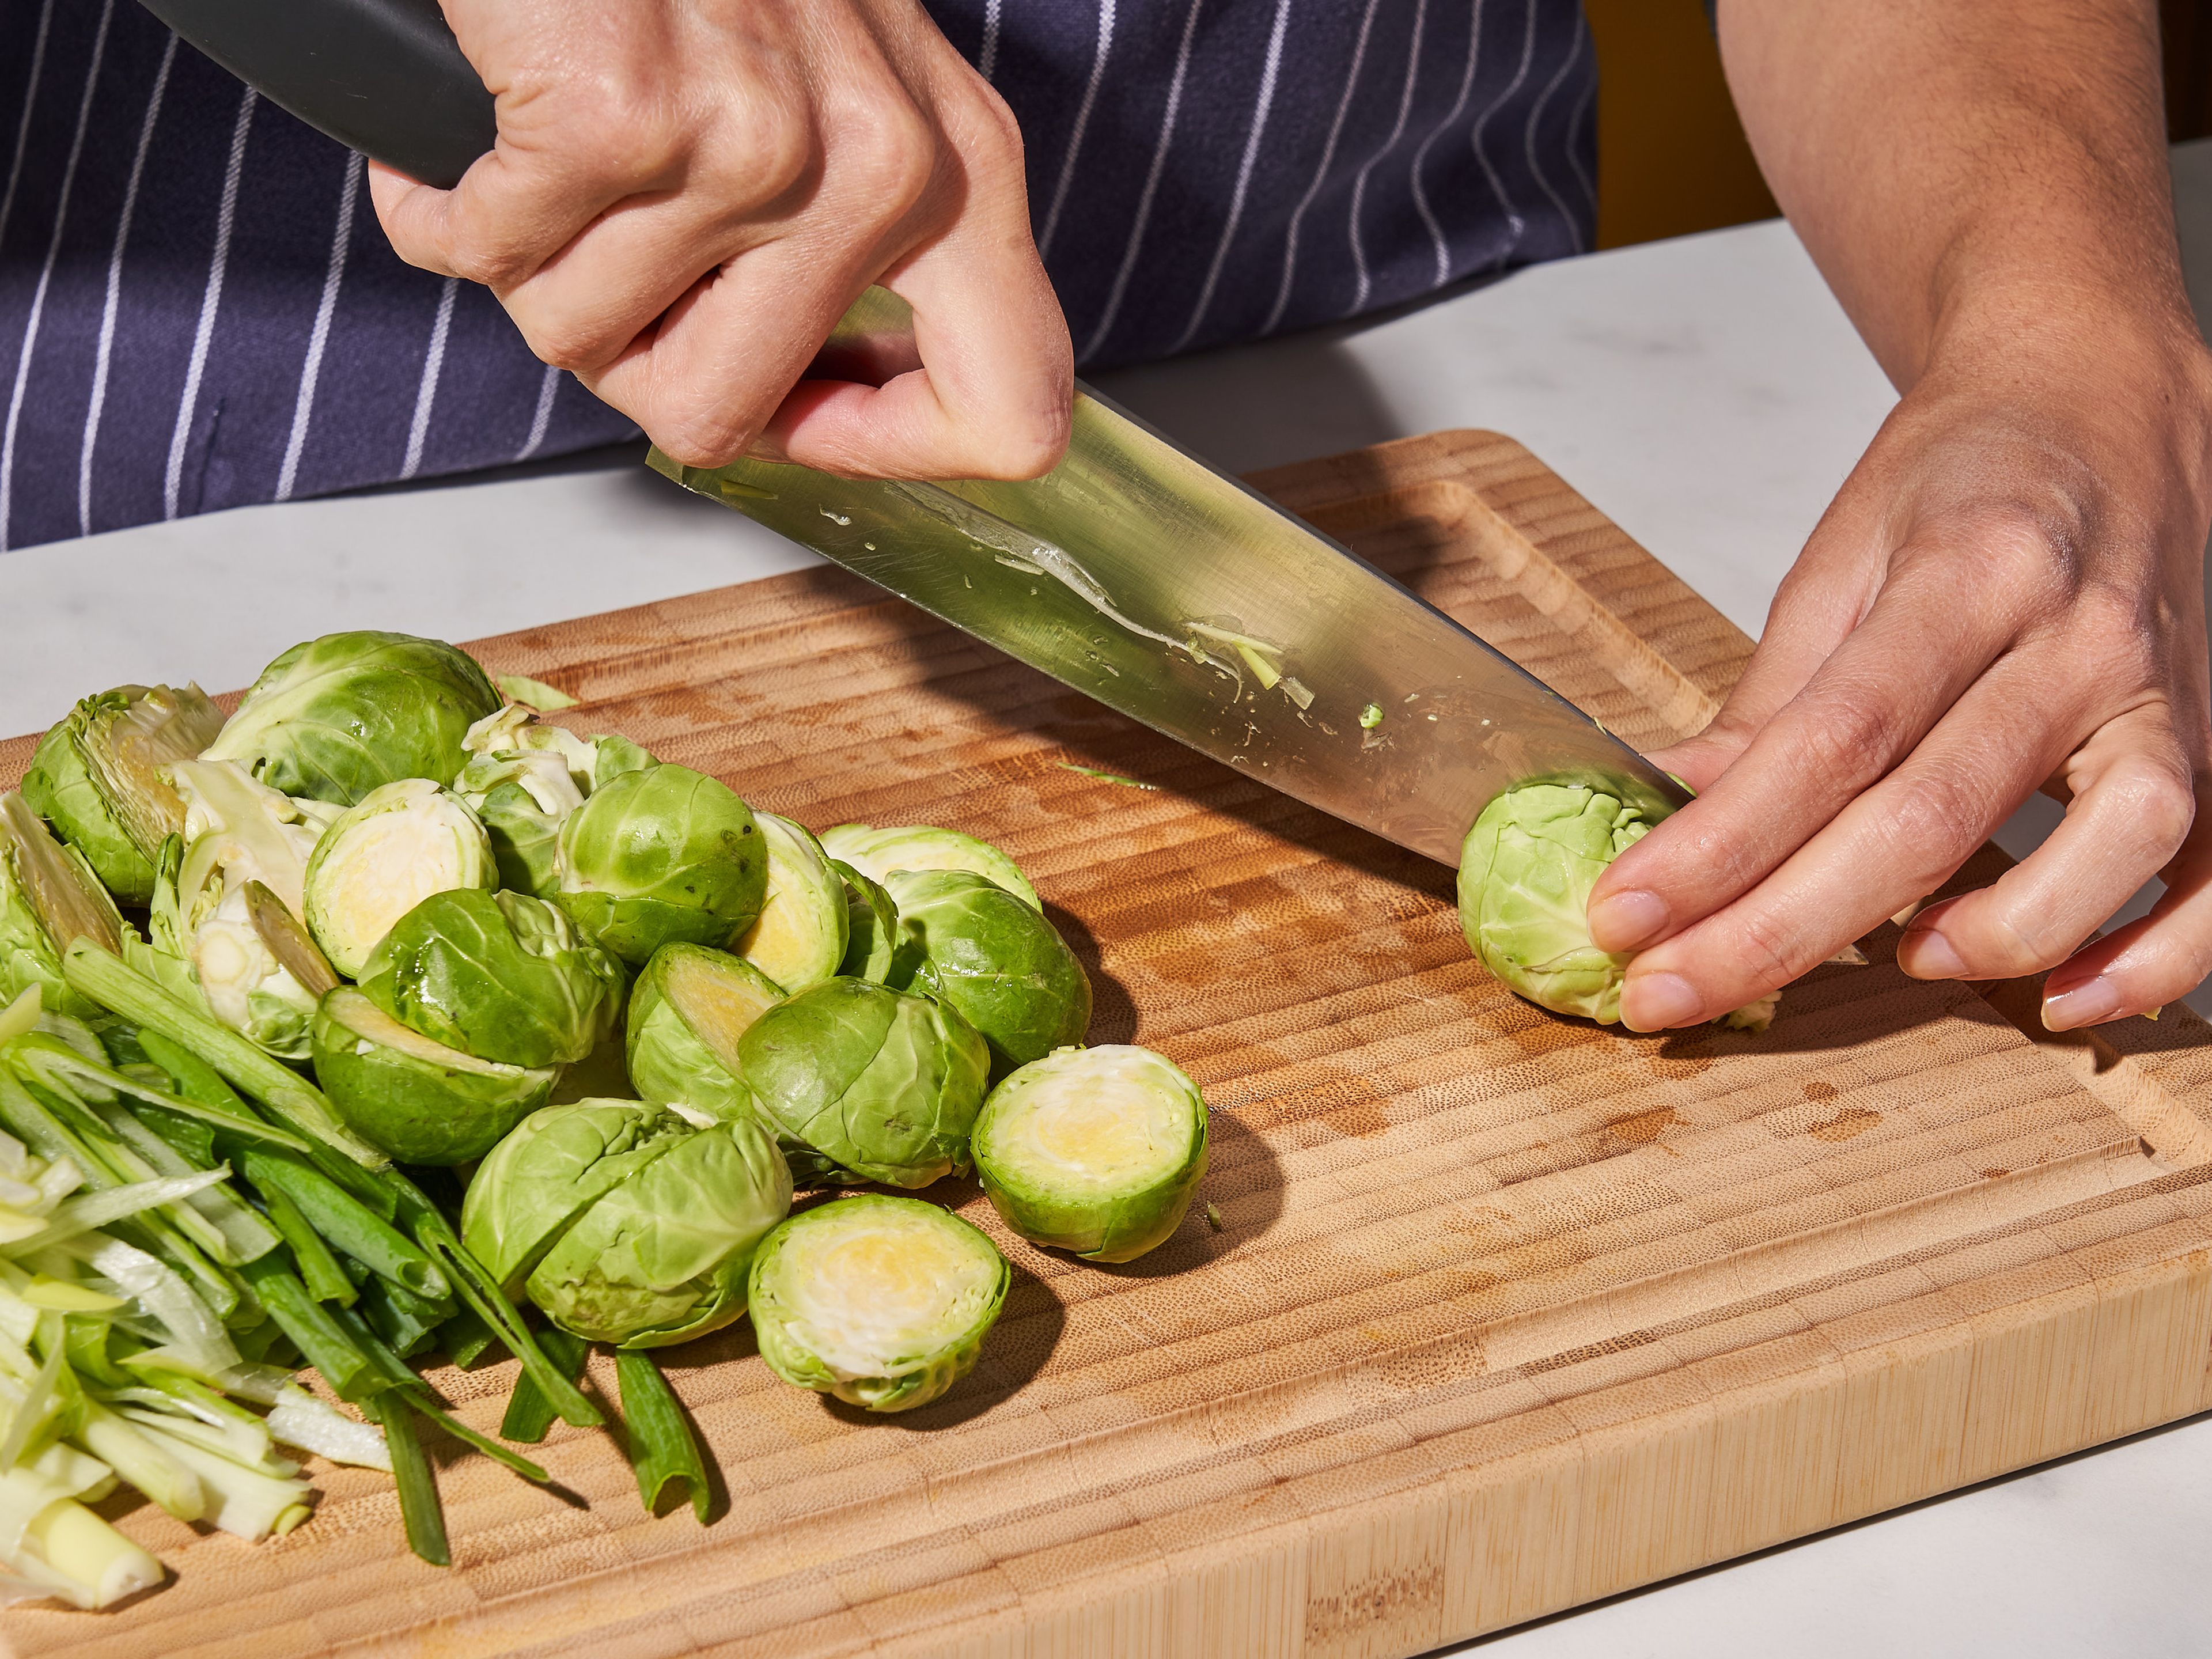 Slice scallions lengthwise and then chop into 1 in./3 cm strips. Set aside. Trim the ends and halve Brussels sprouts. Dissolve salt in the water. Submerge the Brussels sprouts in this brine and let sit for approx. 2 – 3 hrs. Add a weight, like a plate, on top so they are completely submerged. (If you have time, you can soak them overnight, too.) Rinse a few times under cold water and drain.